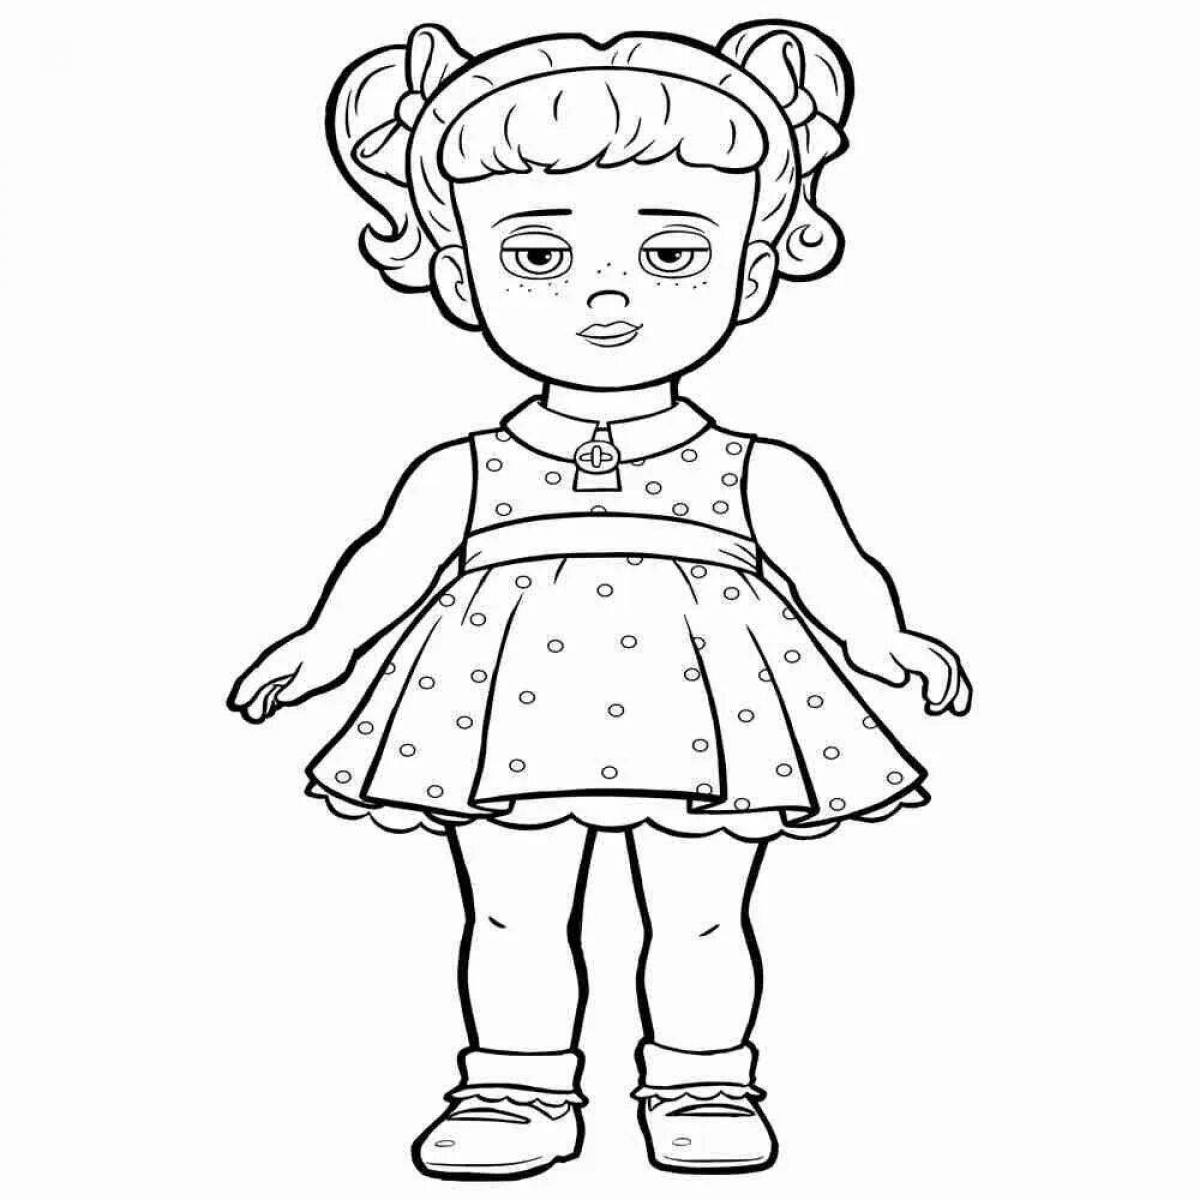 Sparkly doll coloring